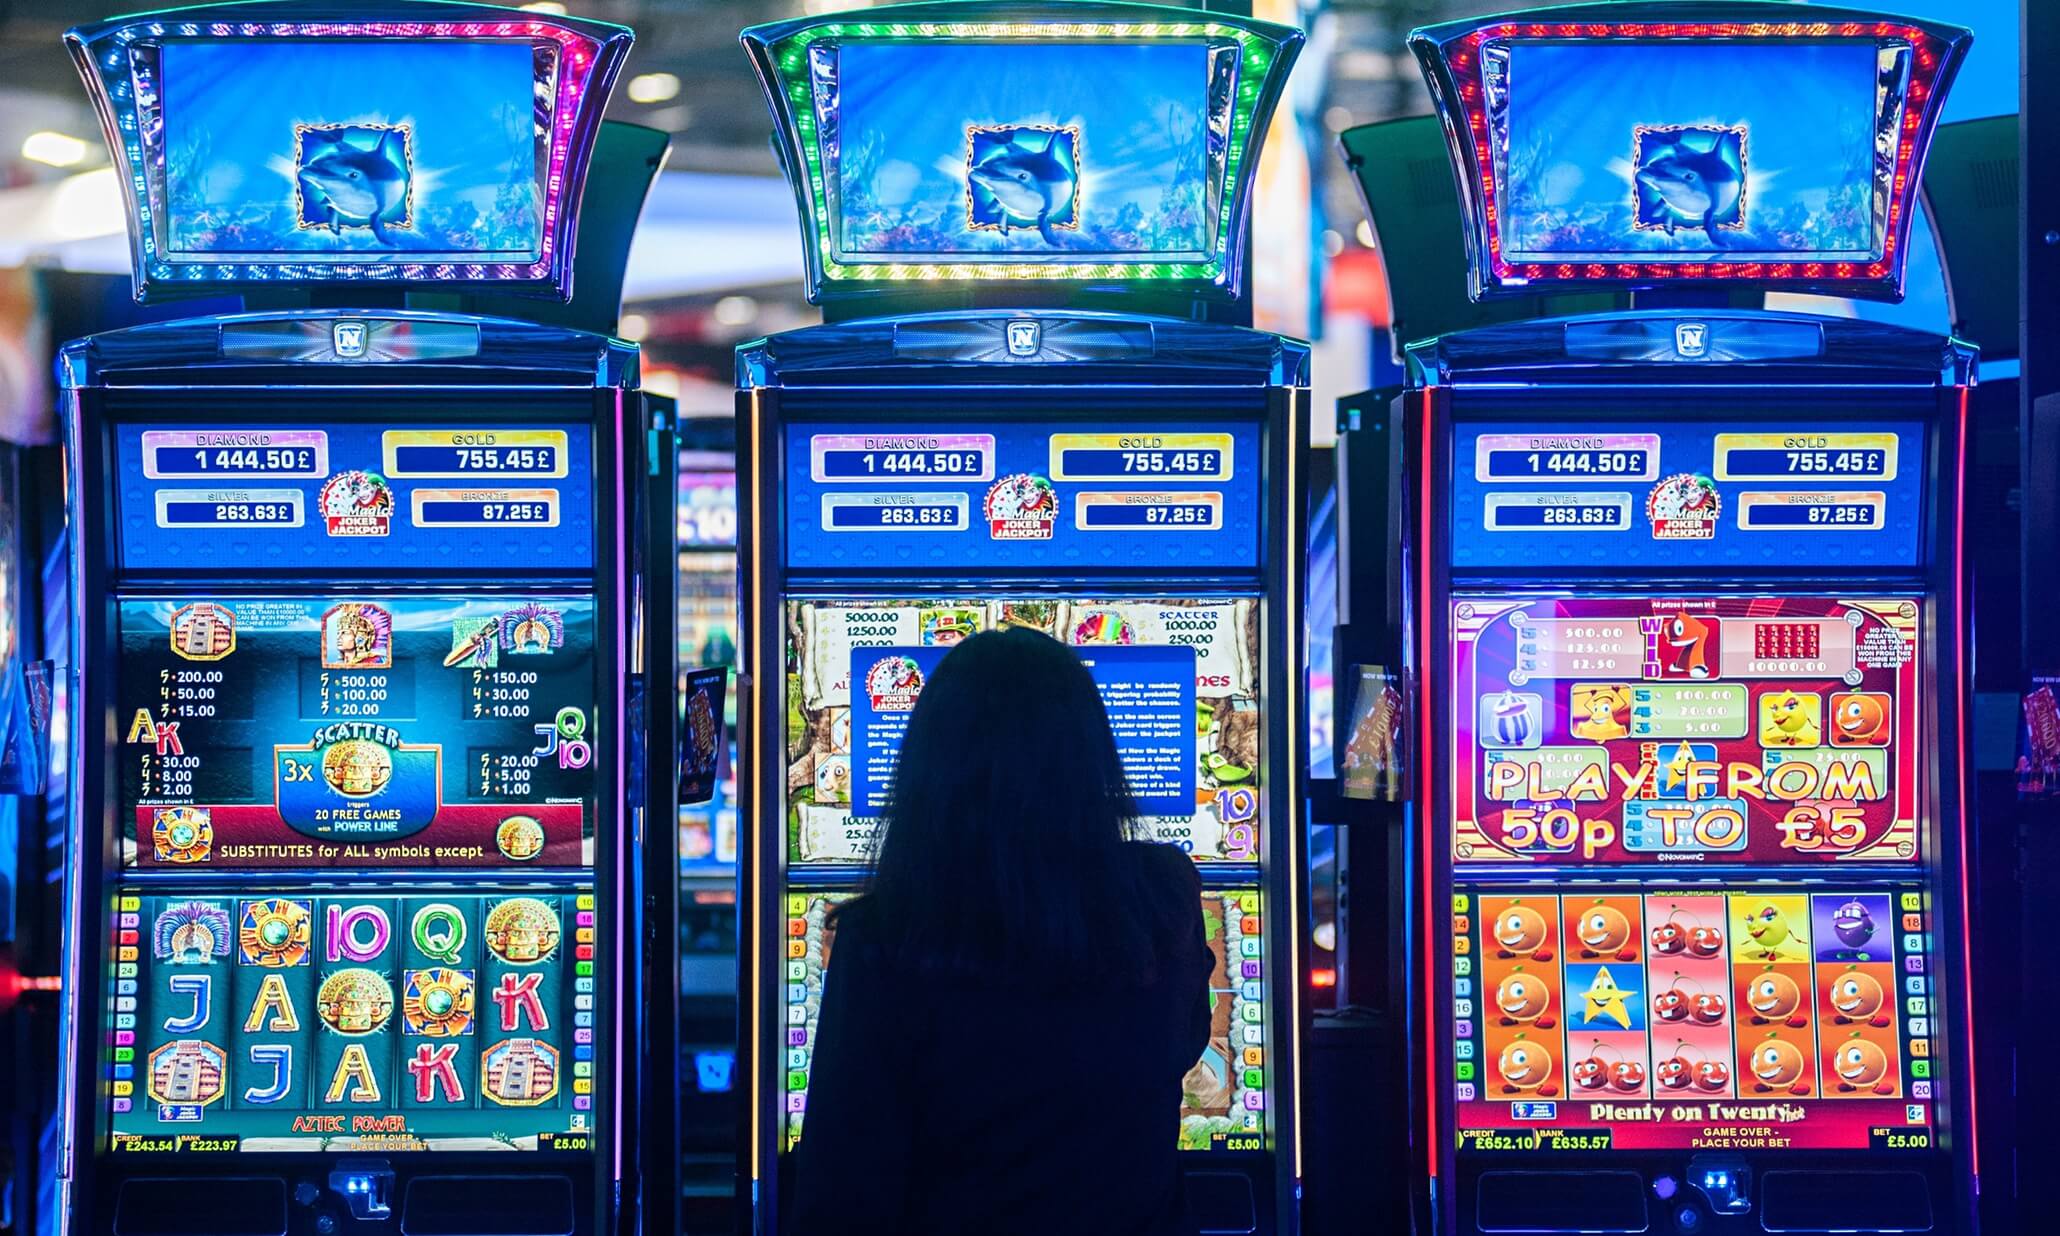 R. Paul Wilson On: Why Slots are a Game of Cat and Mouse for Cheaters and The House